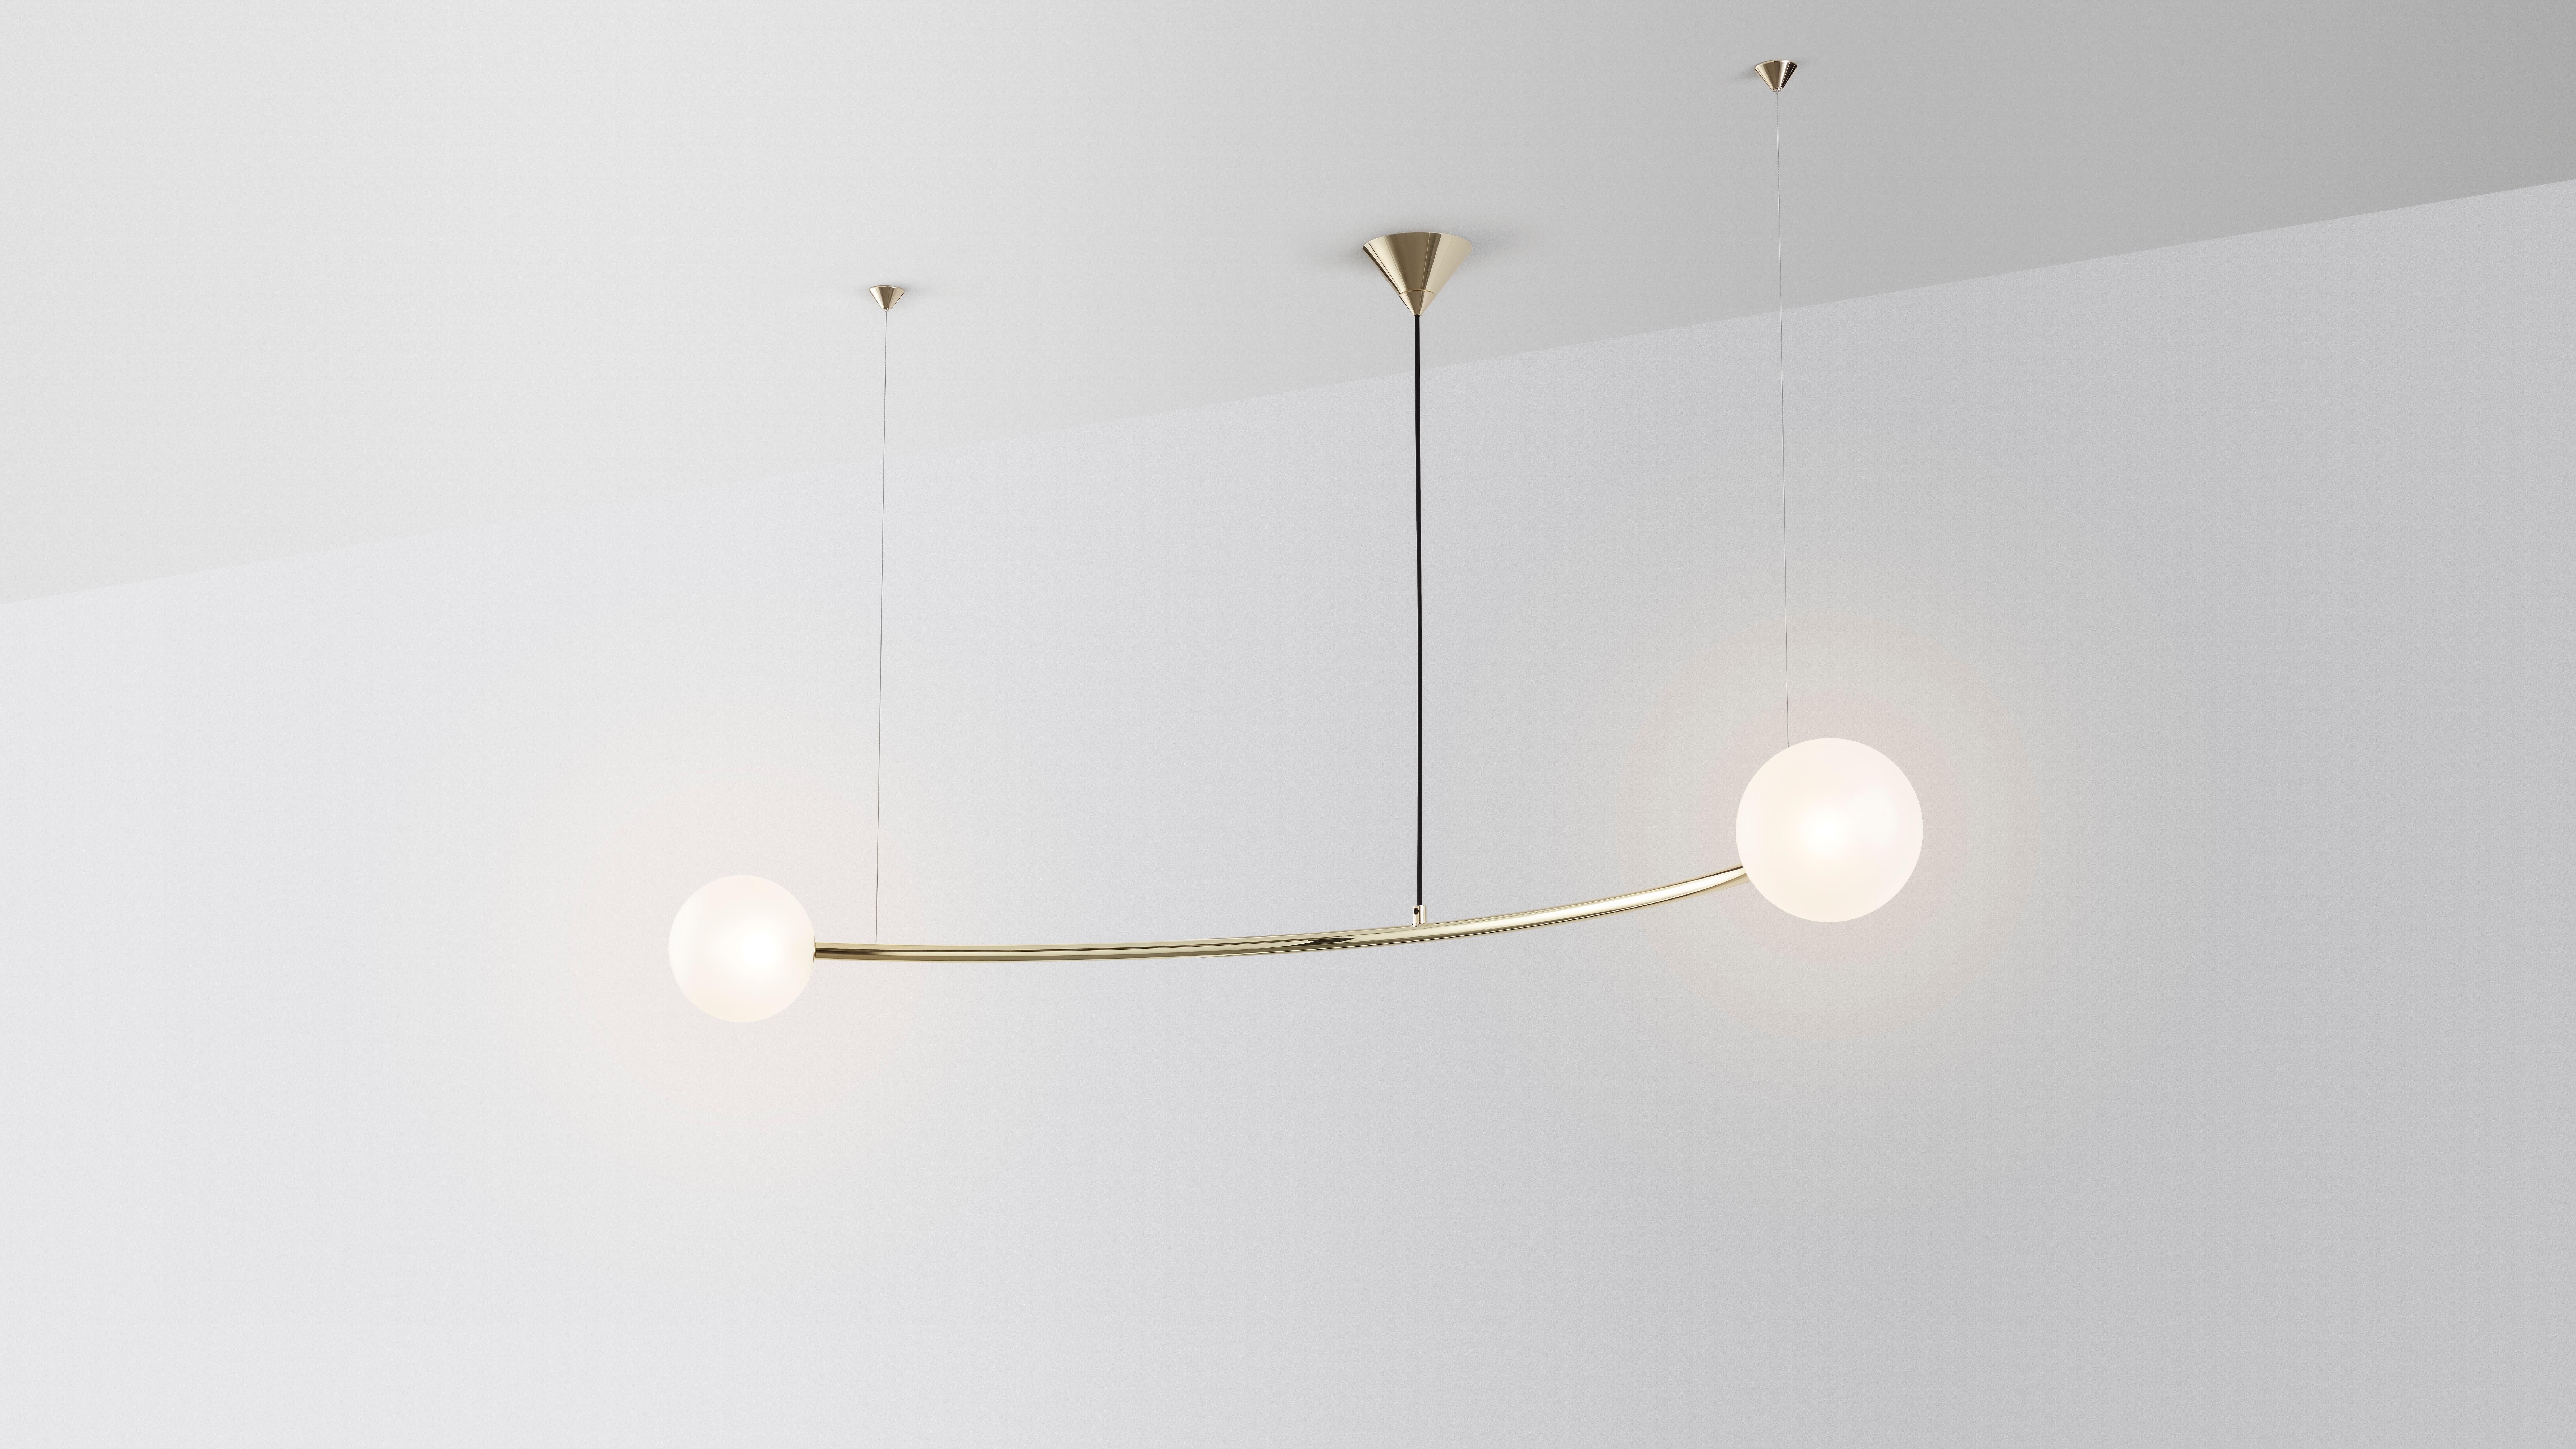 Oddments by Volker Haug 
Dimensions: W 95, D 160, H 40 cm
Materials: Polished or bronzed brass
Finish: Raw, satin lacquer or enamel
Cord / Cable: Black fabric / stainless steel
Suspension: minimum 40 cm

Lamp: G9 - LED or Halogen 240V (120V